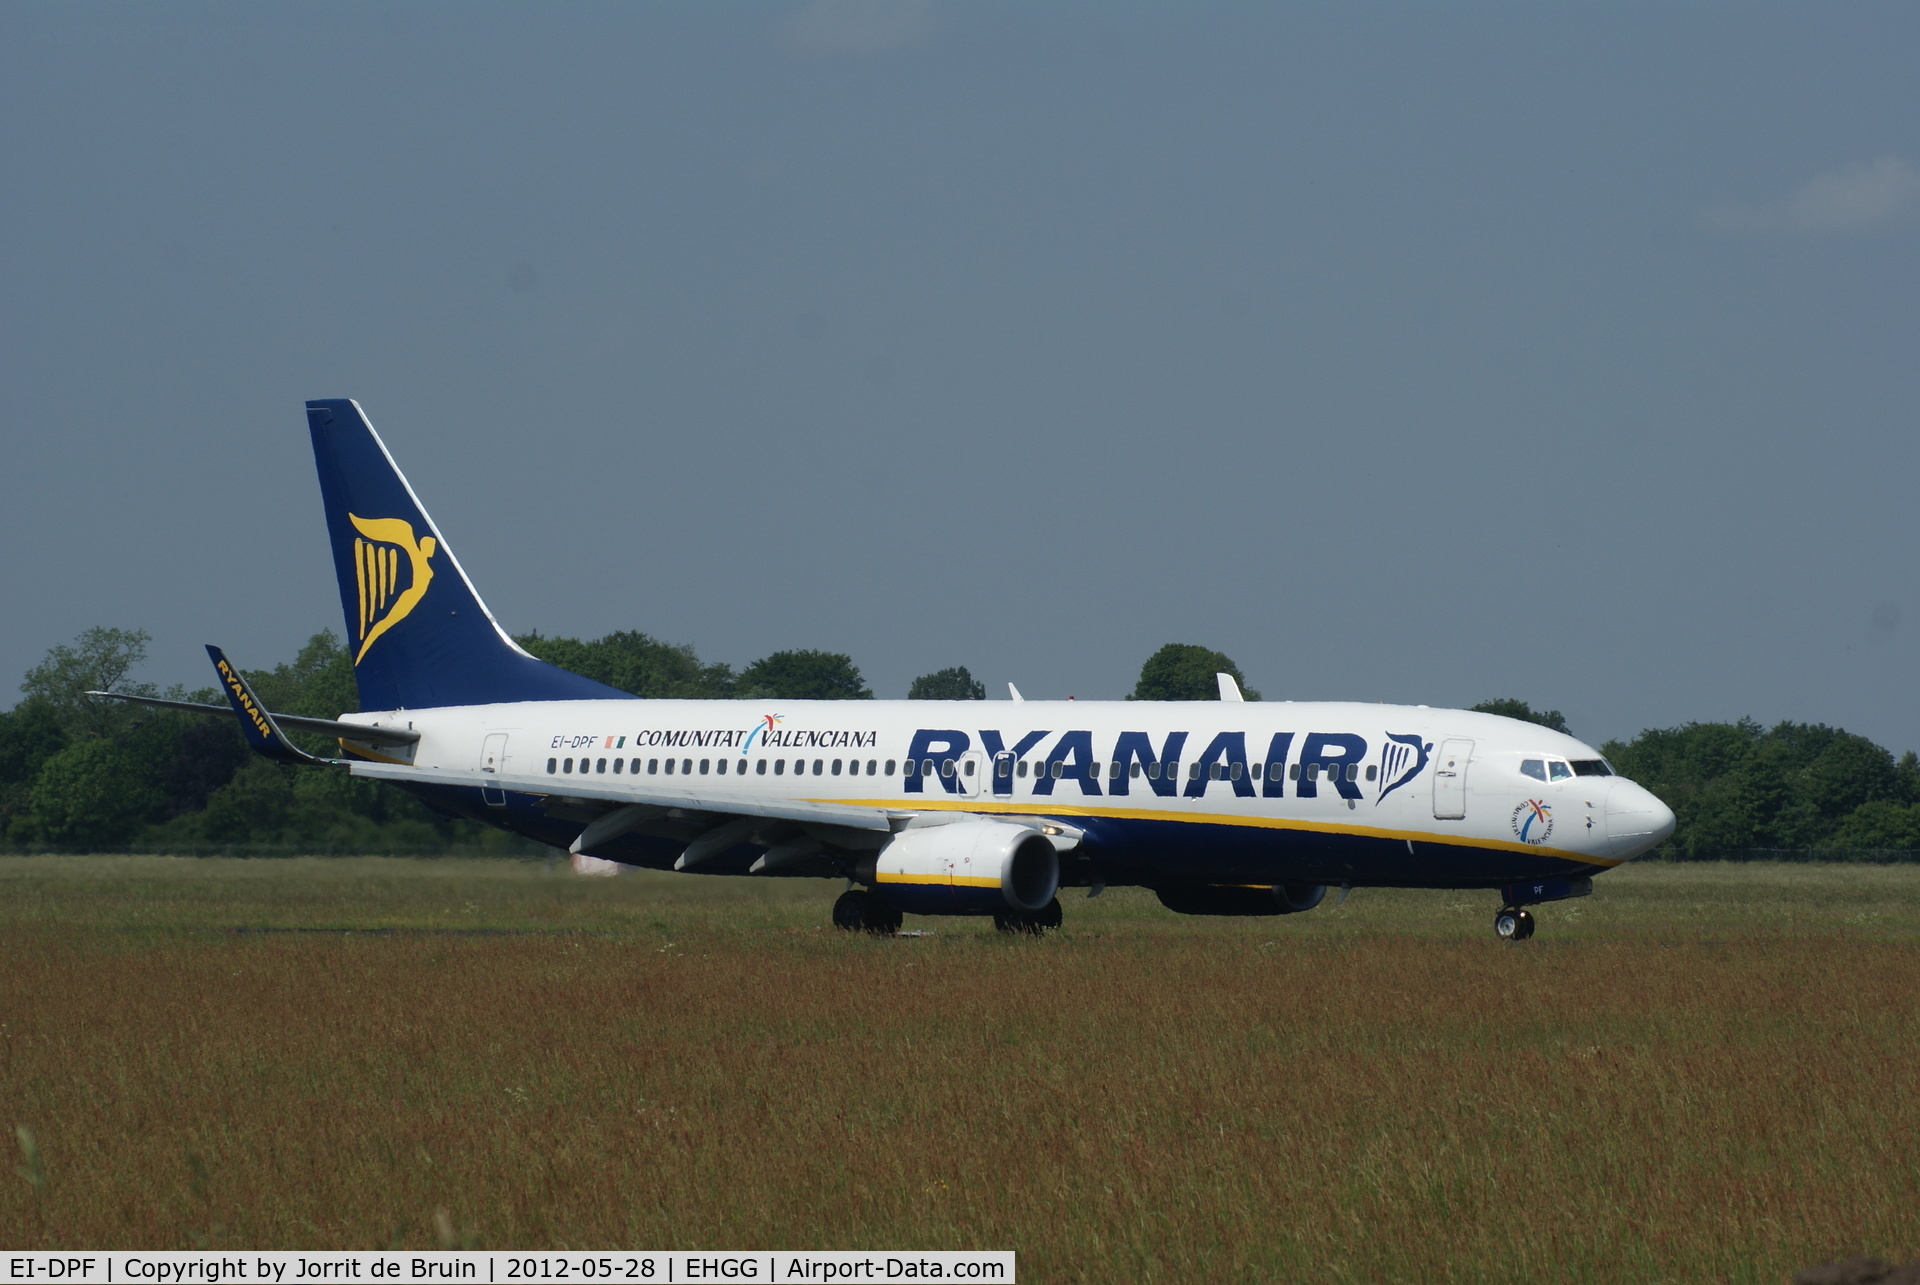 EI-DPF, 2007 Boeing 737-8AS C/N 33606, The Ryanair also reached Eelde Airport from a flight of the sunny Italy. But here in the Netherlands it was sunny as well, so a nice opportunity to take a good photograph!